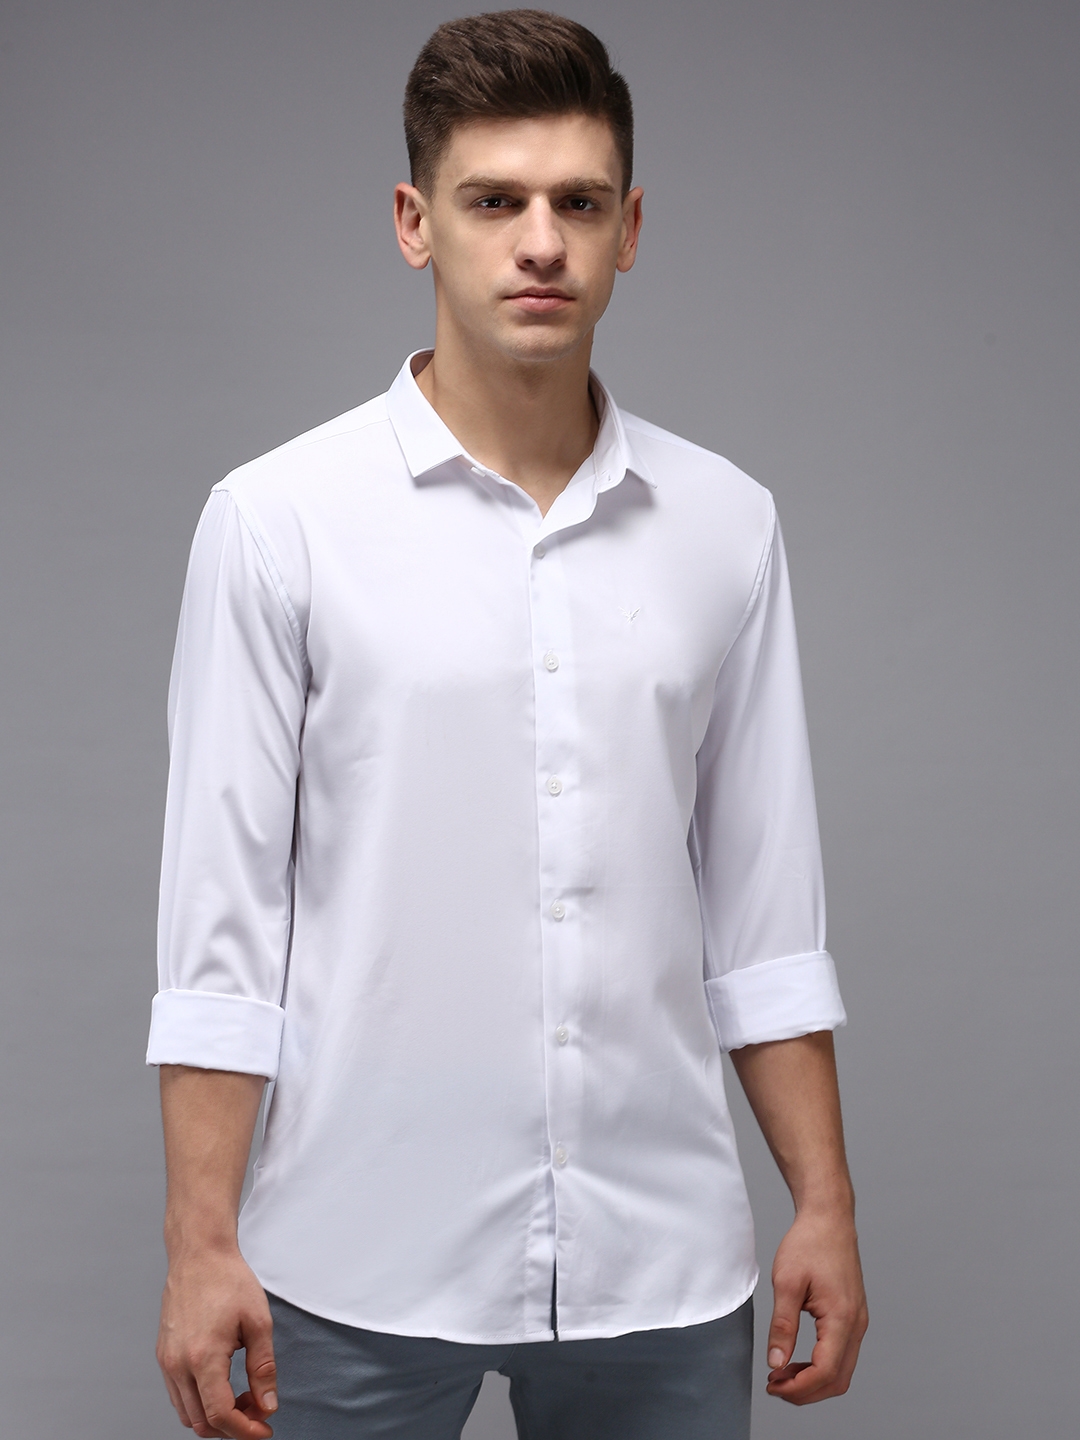 Showoff | SHOWOFF Men's White Spread Collar Solid Classic Fit Shirt